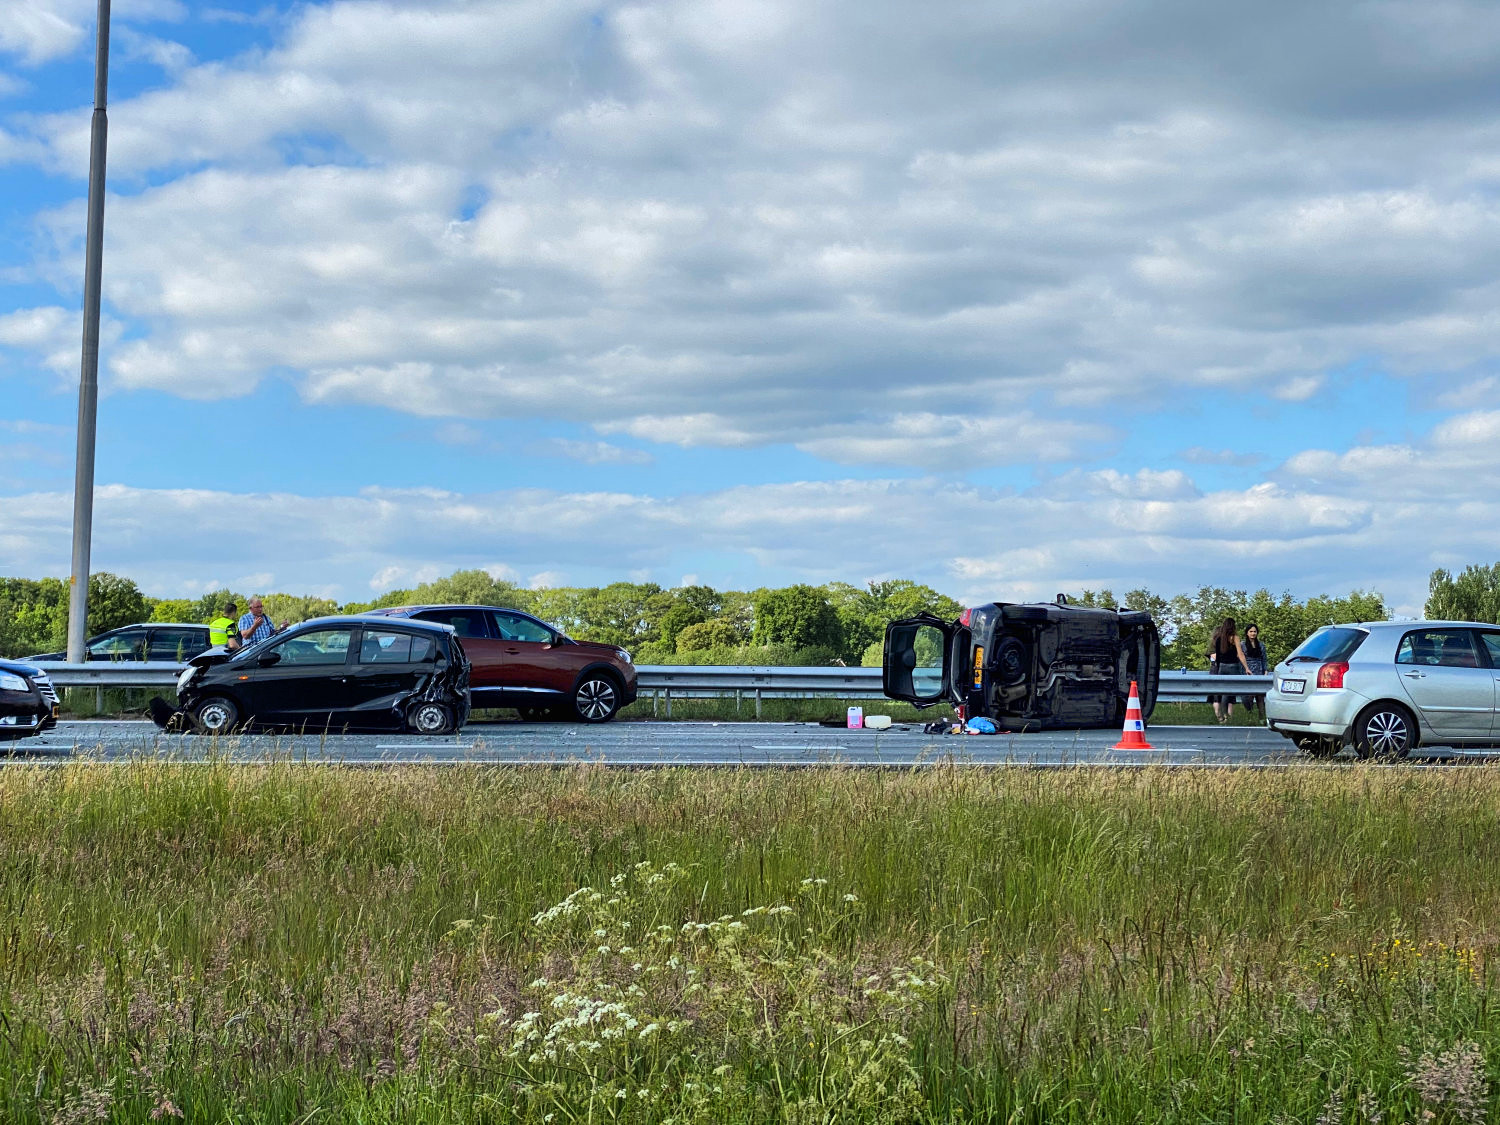 Accident on the A1 at hectometre marker 53.5 Re on 20 May 2020 (photograph: Damian Ruitenga)